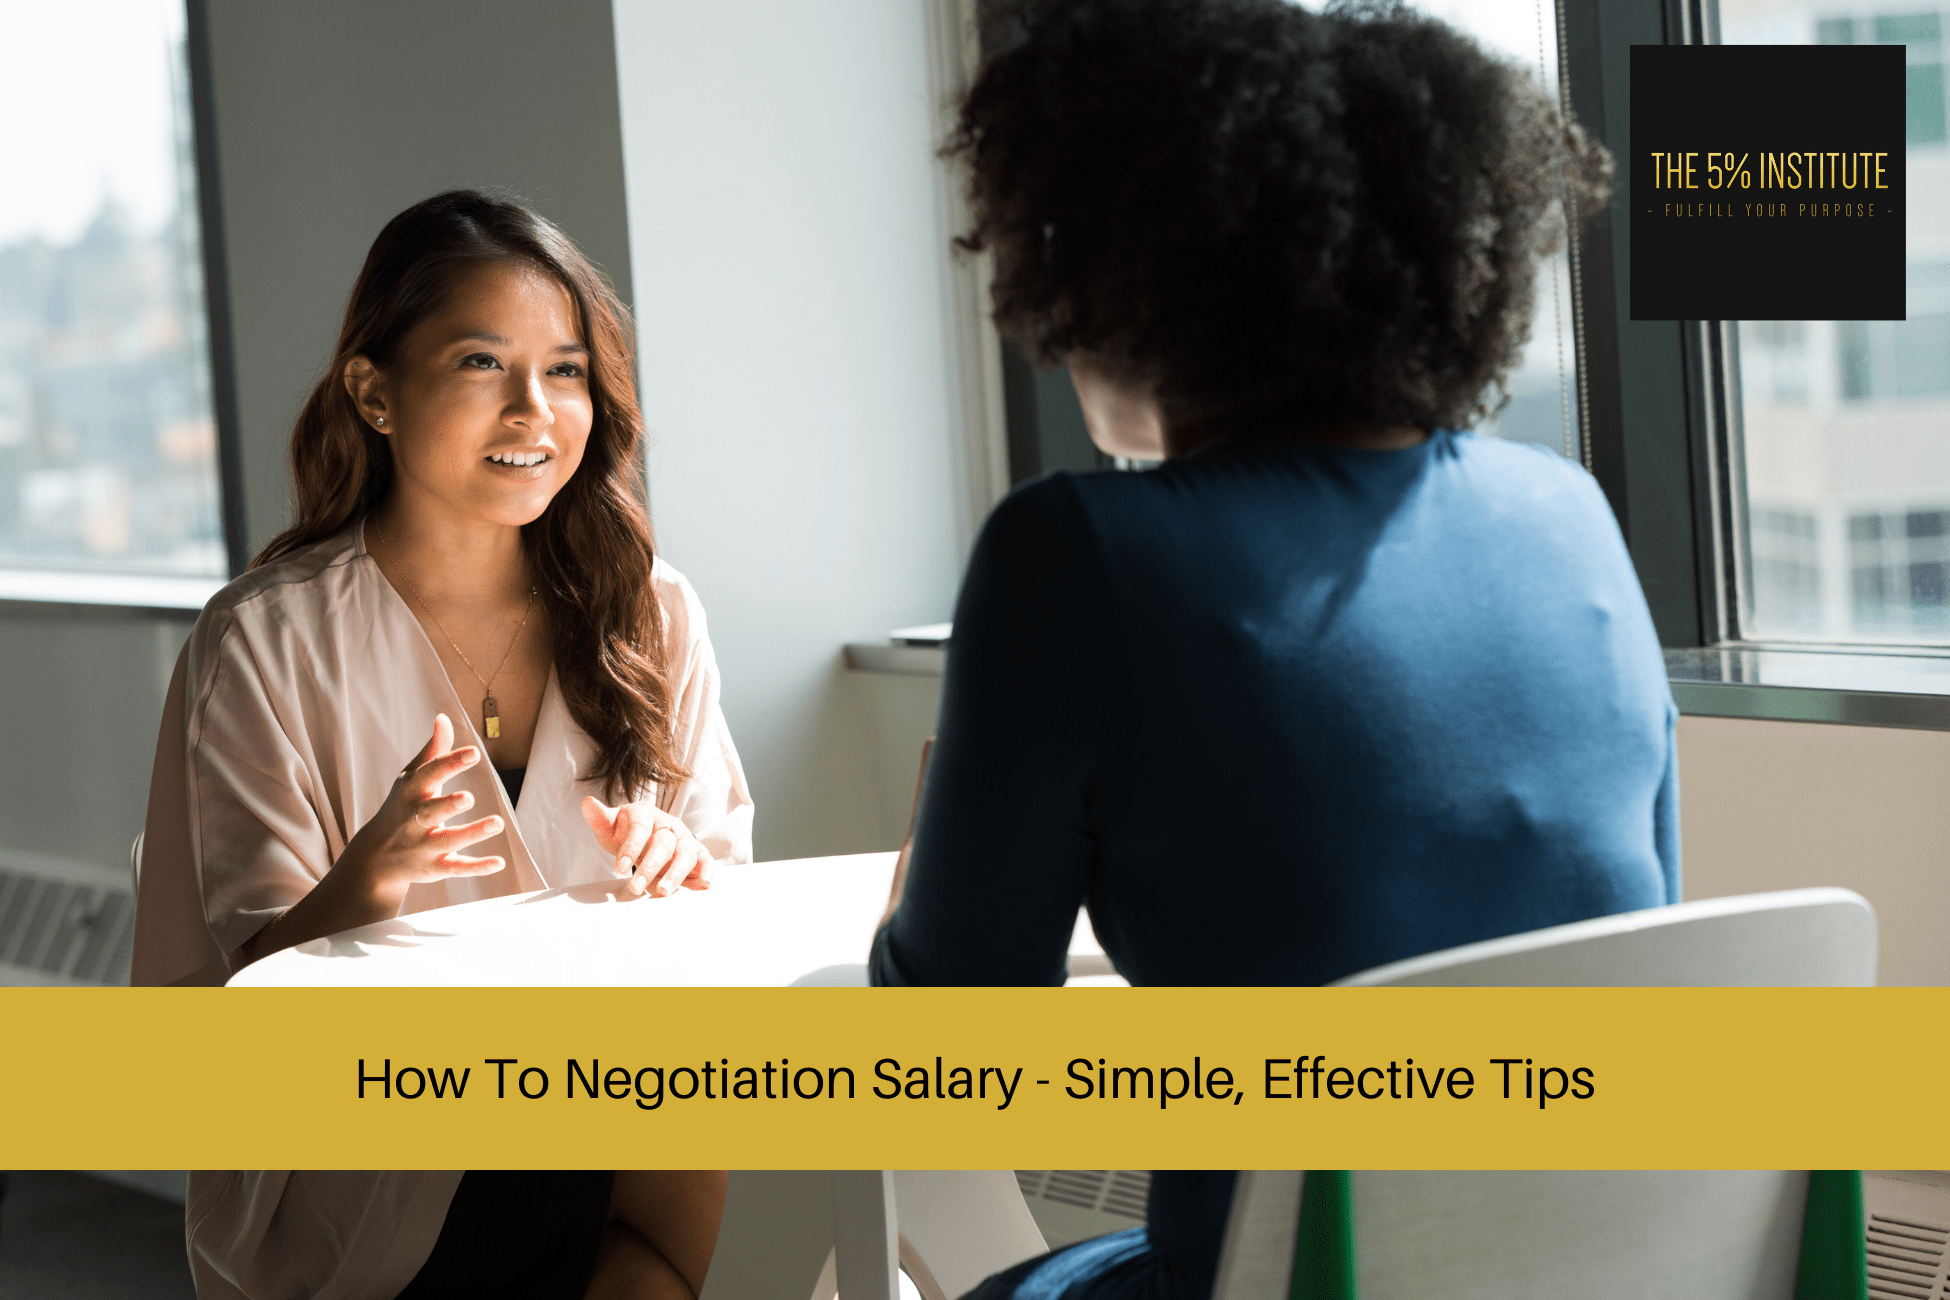 How To Negotiation Salary - Simple, Effective Tips